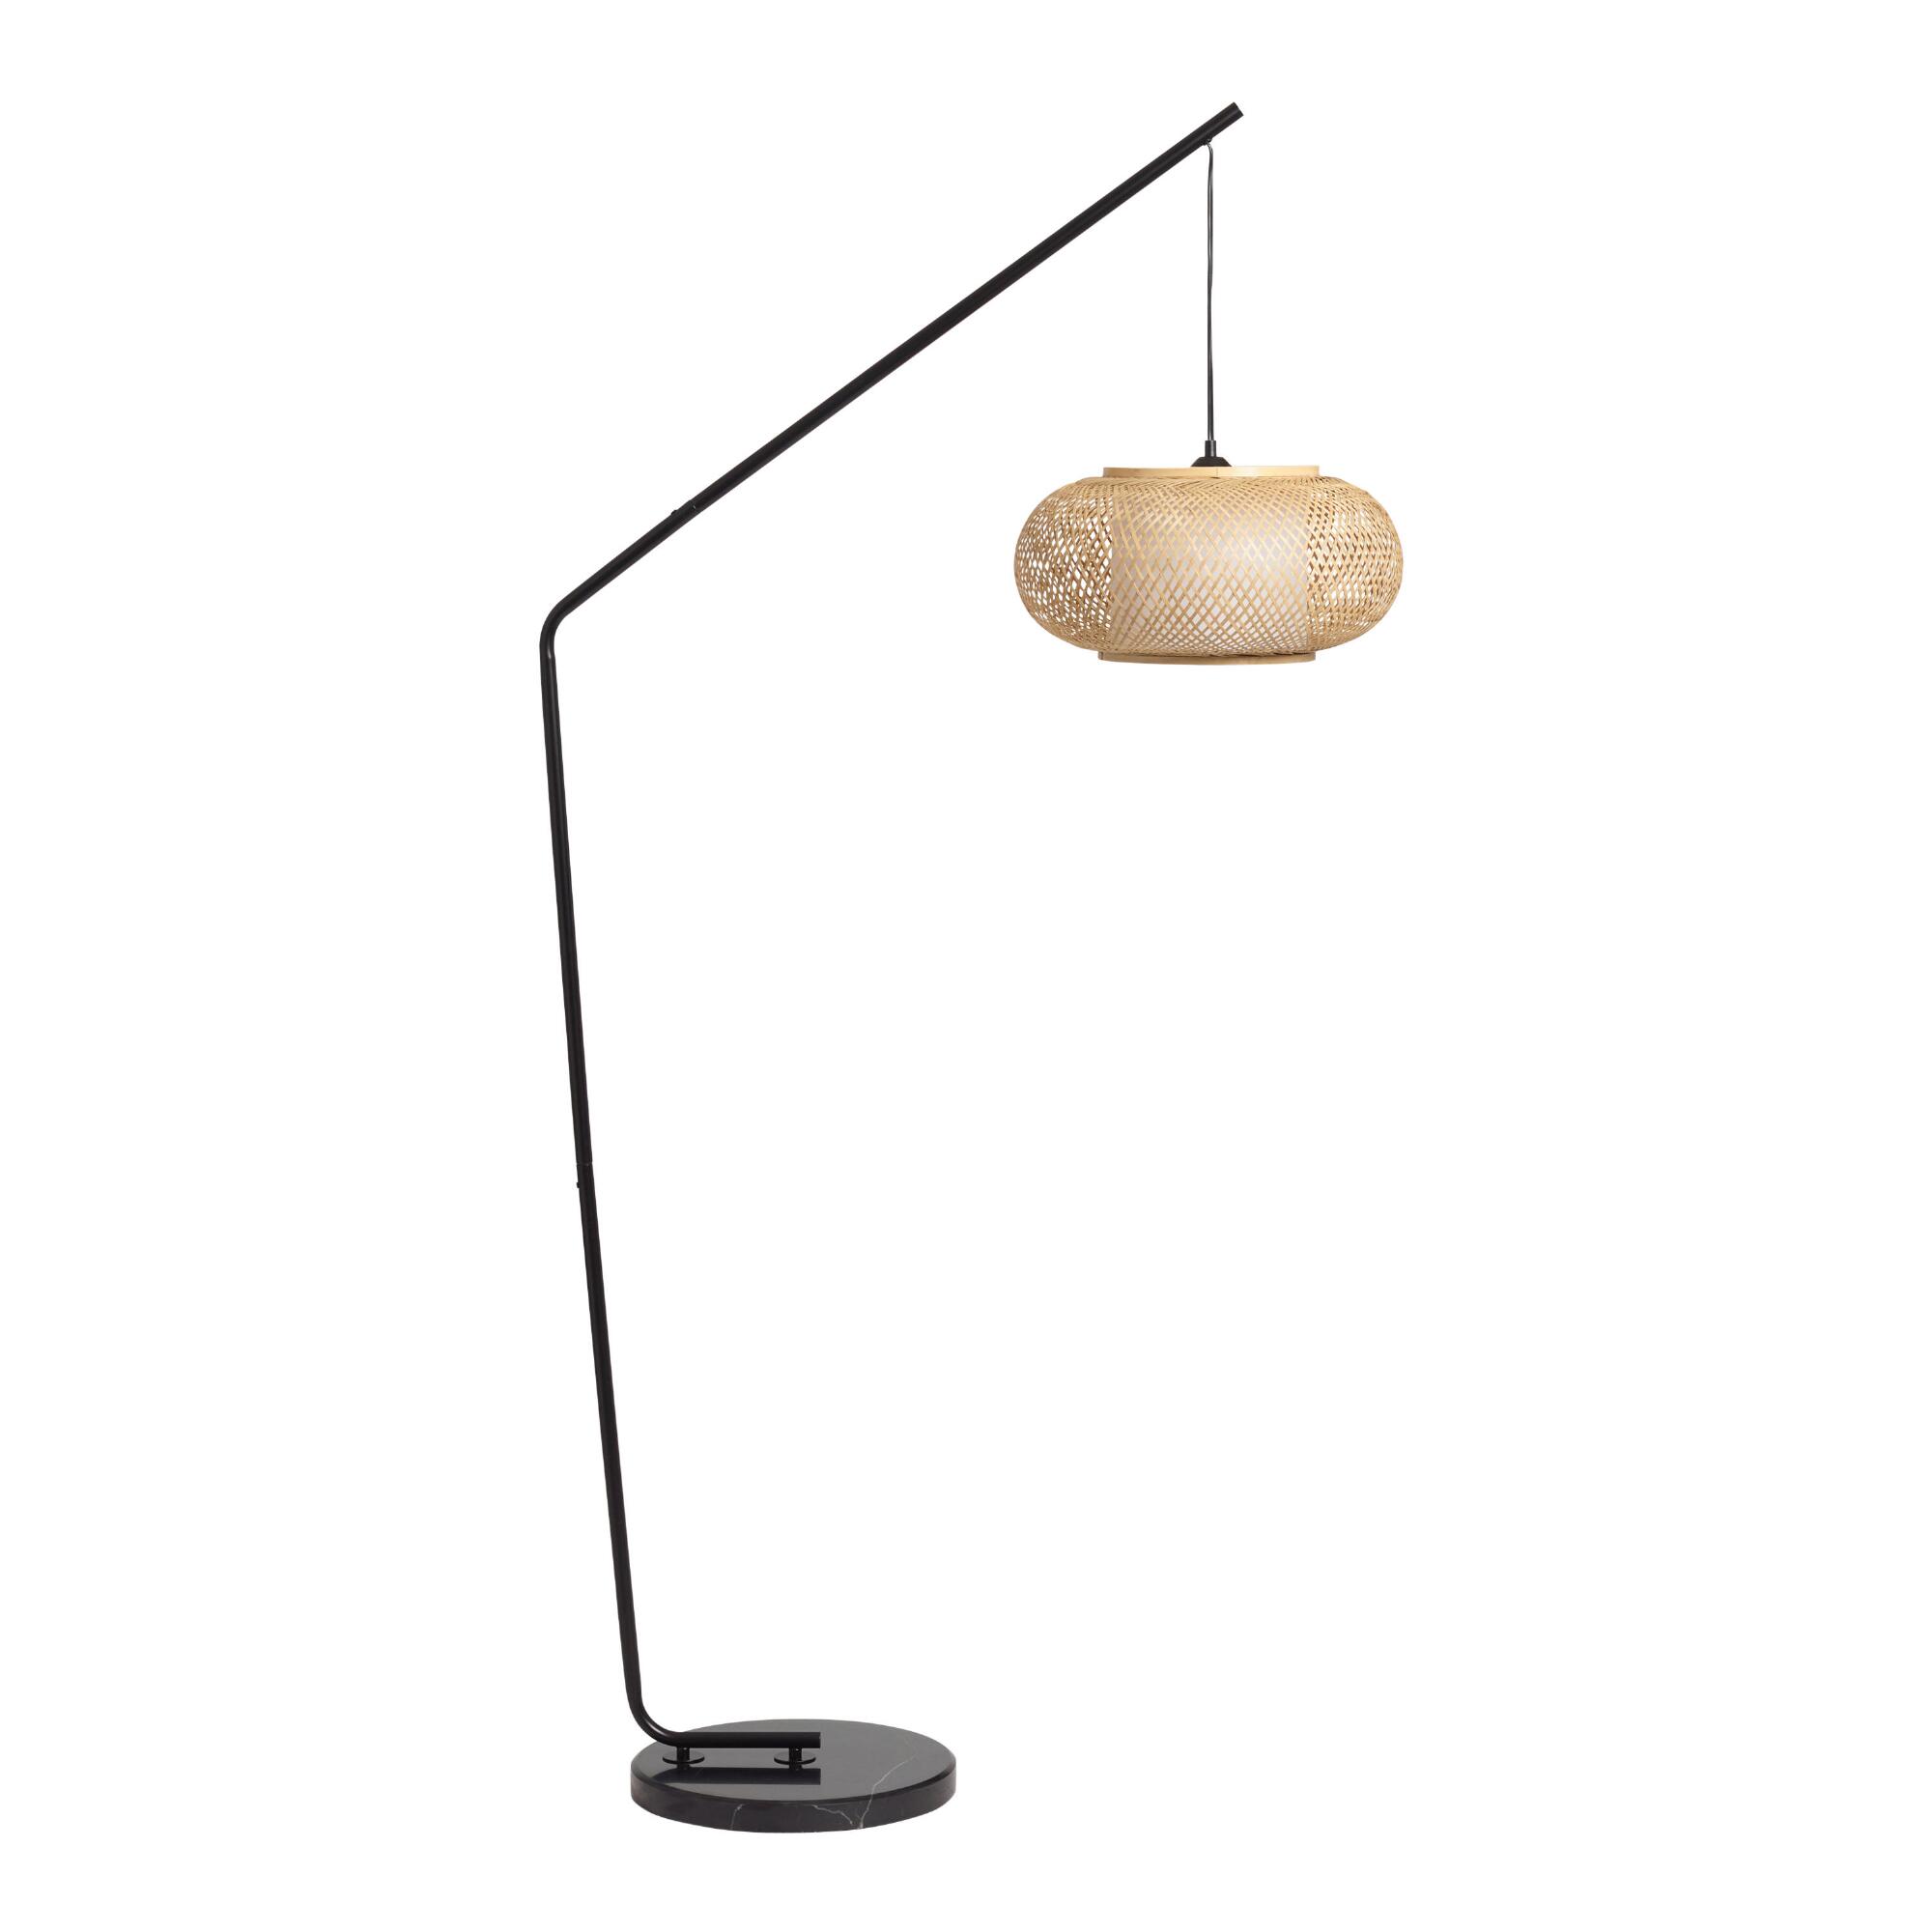 Marble and Bamboo Bali Arc Floor Lamp by World Market